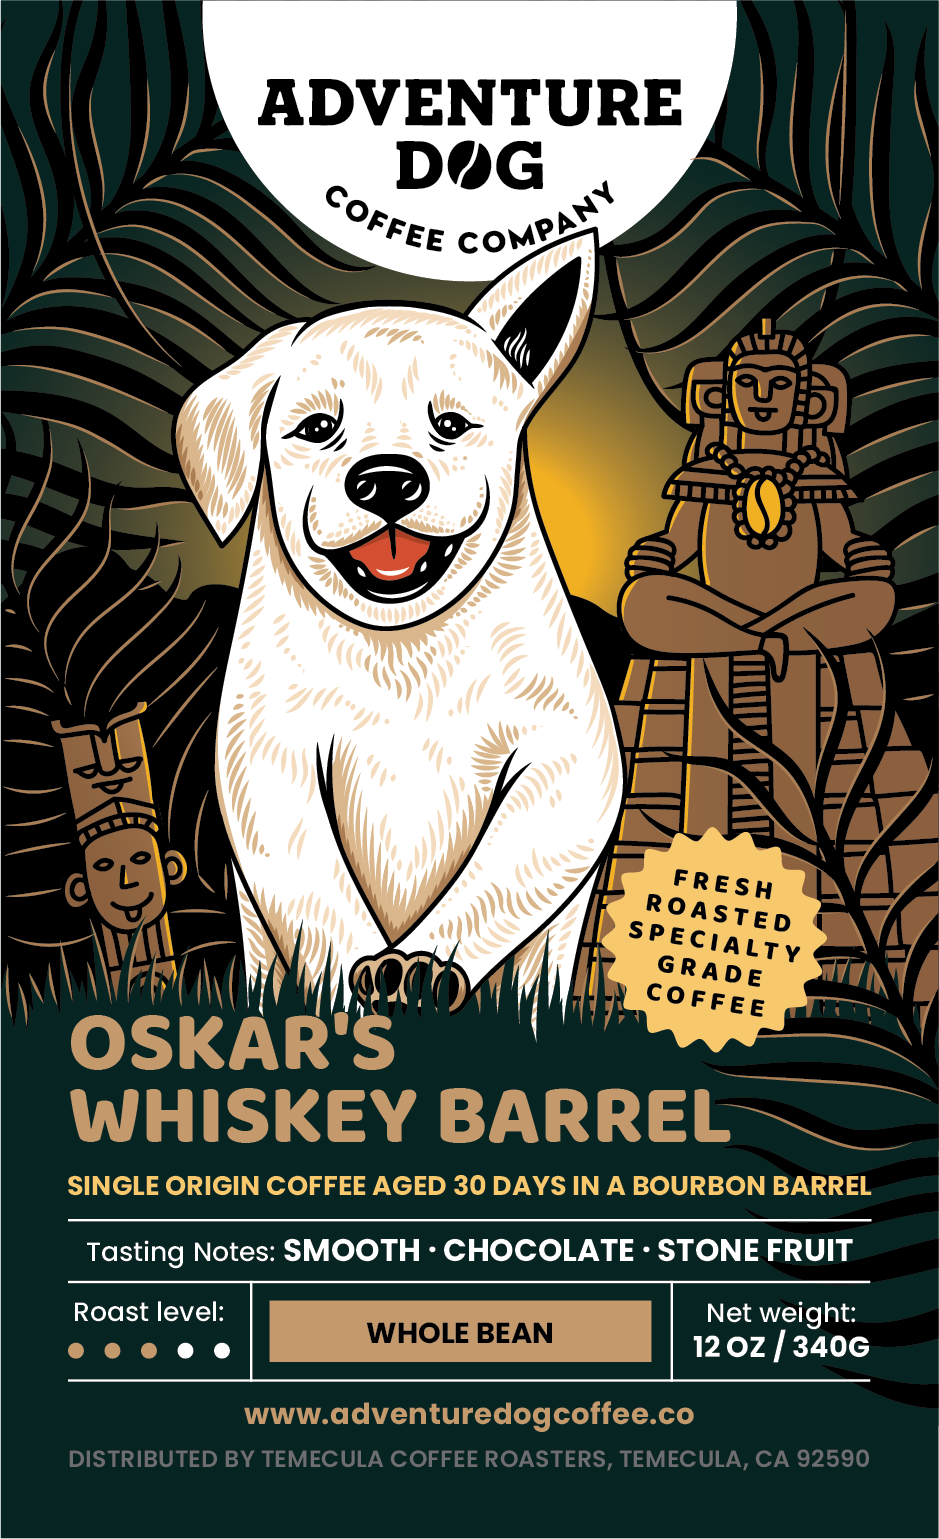 Adventure Dog Coffee Co.'s Oskar the Golden Retriever on the label of specialty-grade Whiskey Barrel-Aged Coffee, medium-roasted to capture complex bourbon flavors and natural coffee notes, delivering aromas of bourbon, chocolate, and subtle hints of fruit.